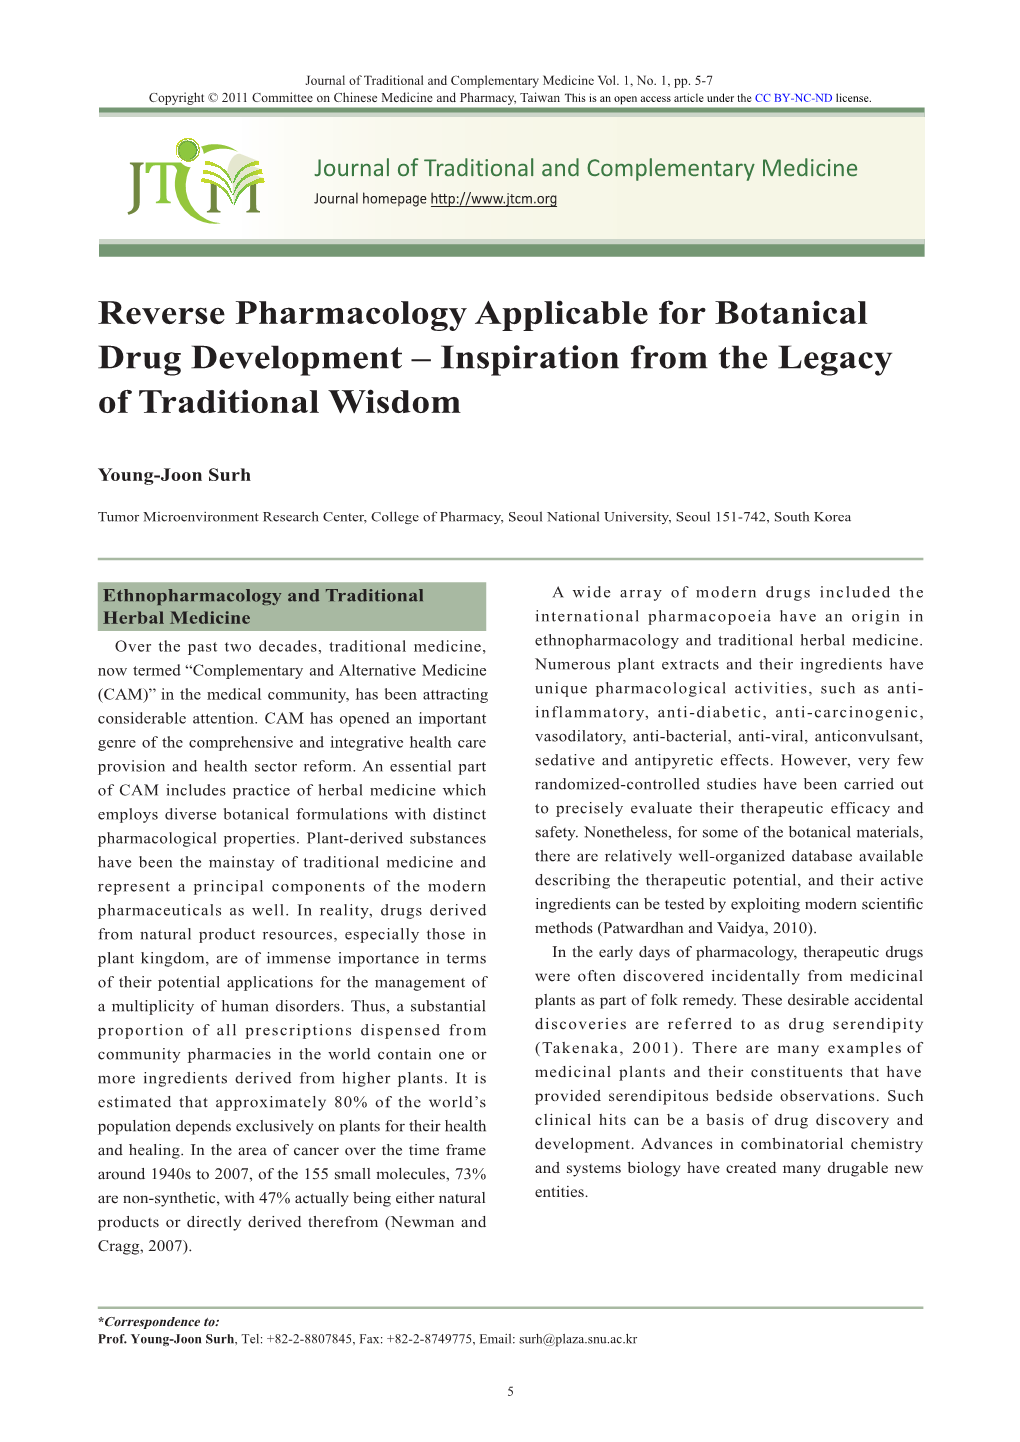 Reverse Pharmacology Applicable for Botanical Drug Development – Inspiration from the Legacy of Traditional Wisdom